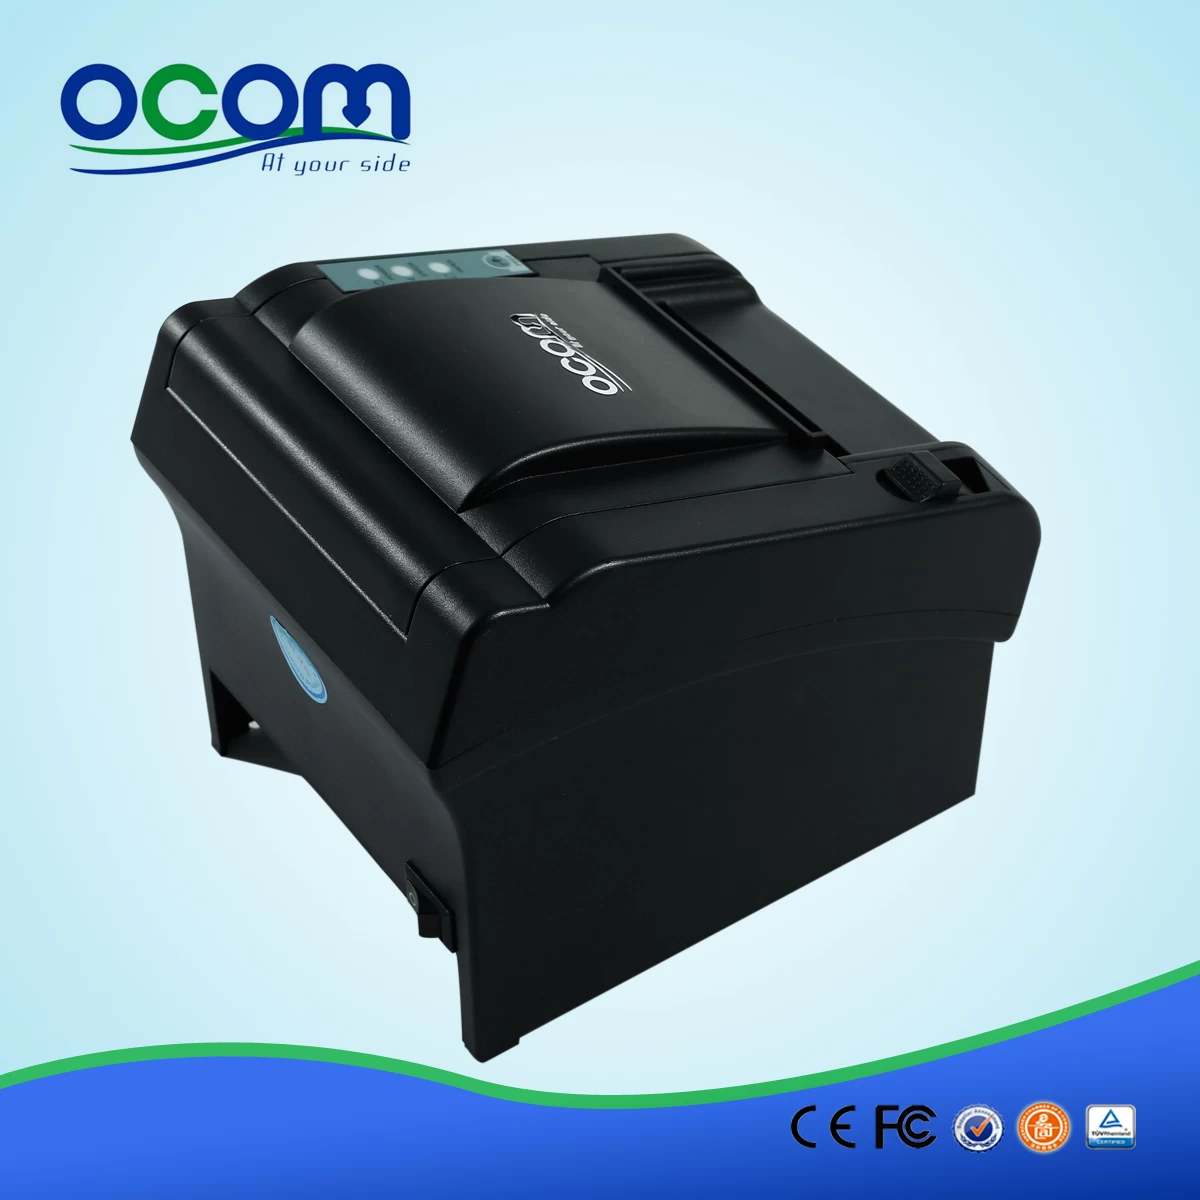 OCPP-802 80mm Impact Thermal Printers for POS System